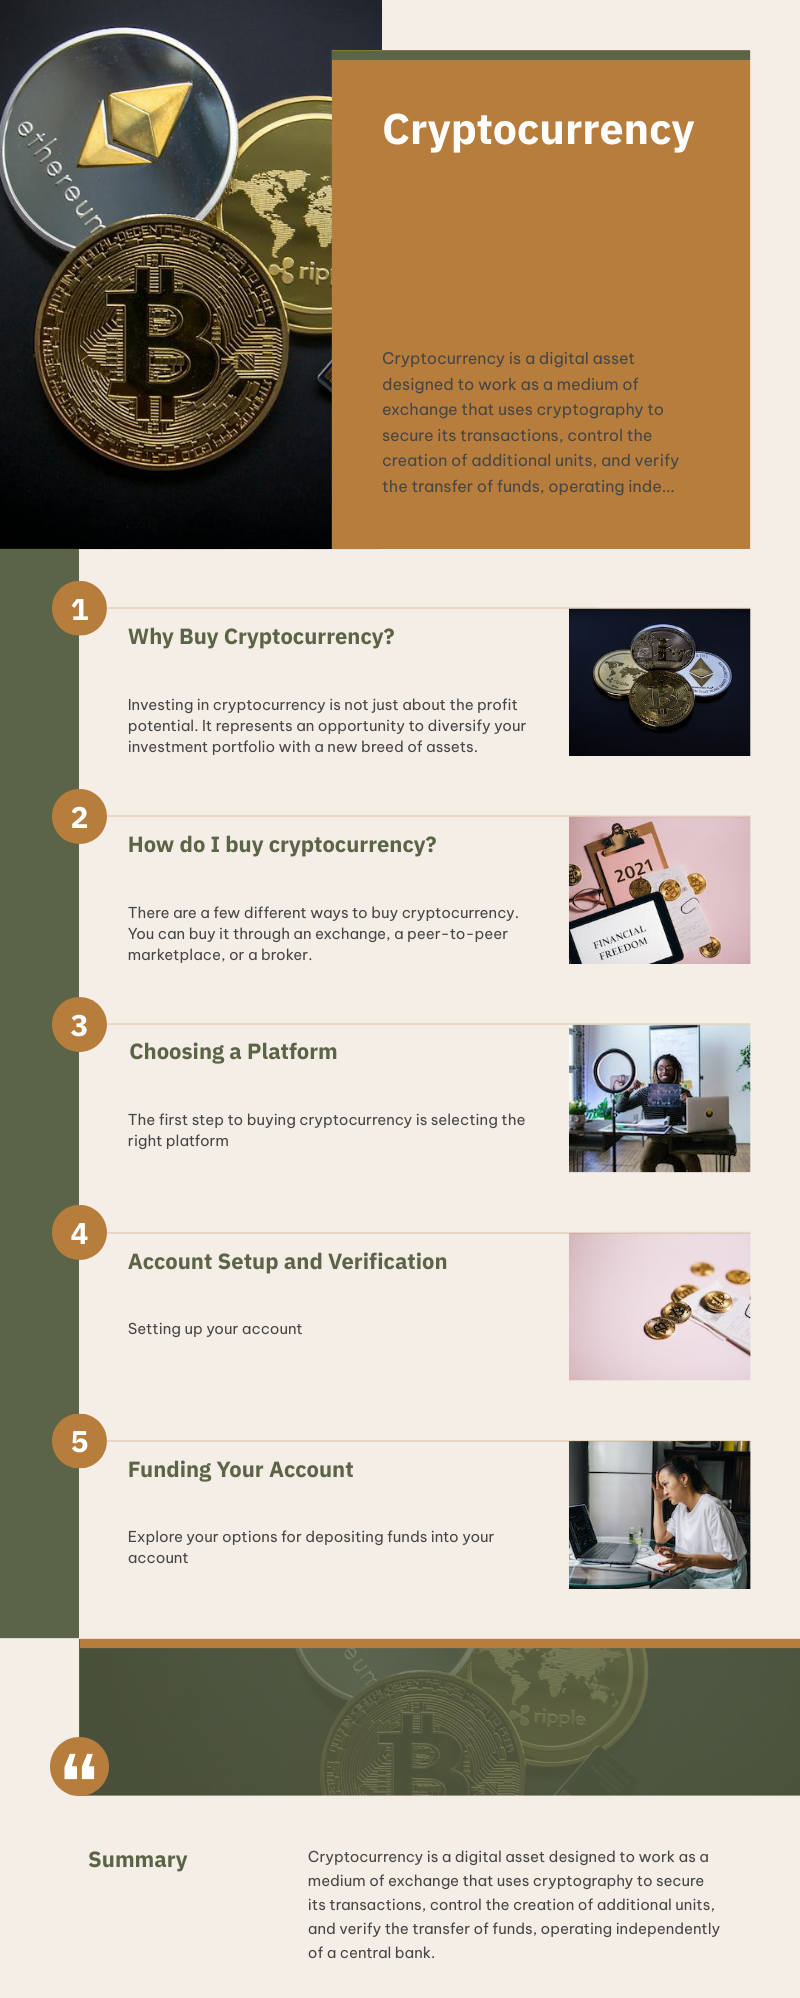 An infographic explaining the basics of cryptocurrency, with sections on buying, choosing a platform, account setup, and funding, alongside relevant images like crypto coins and people using computers.